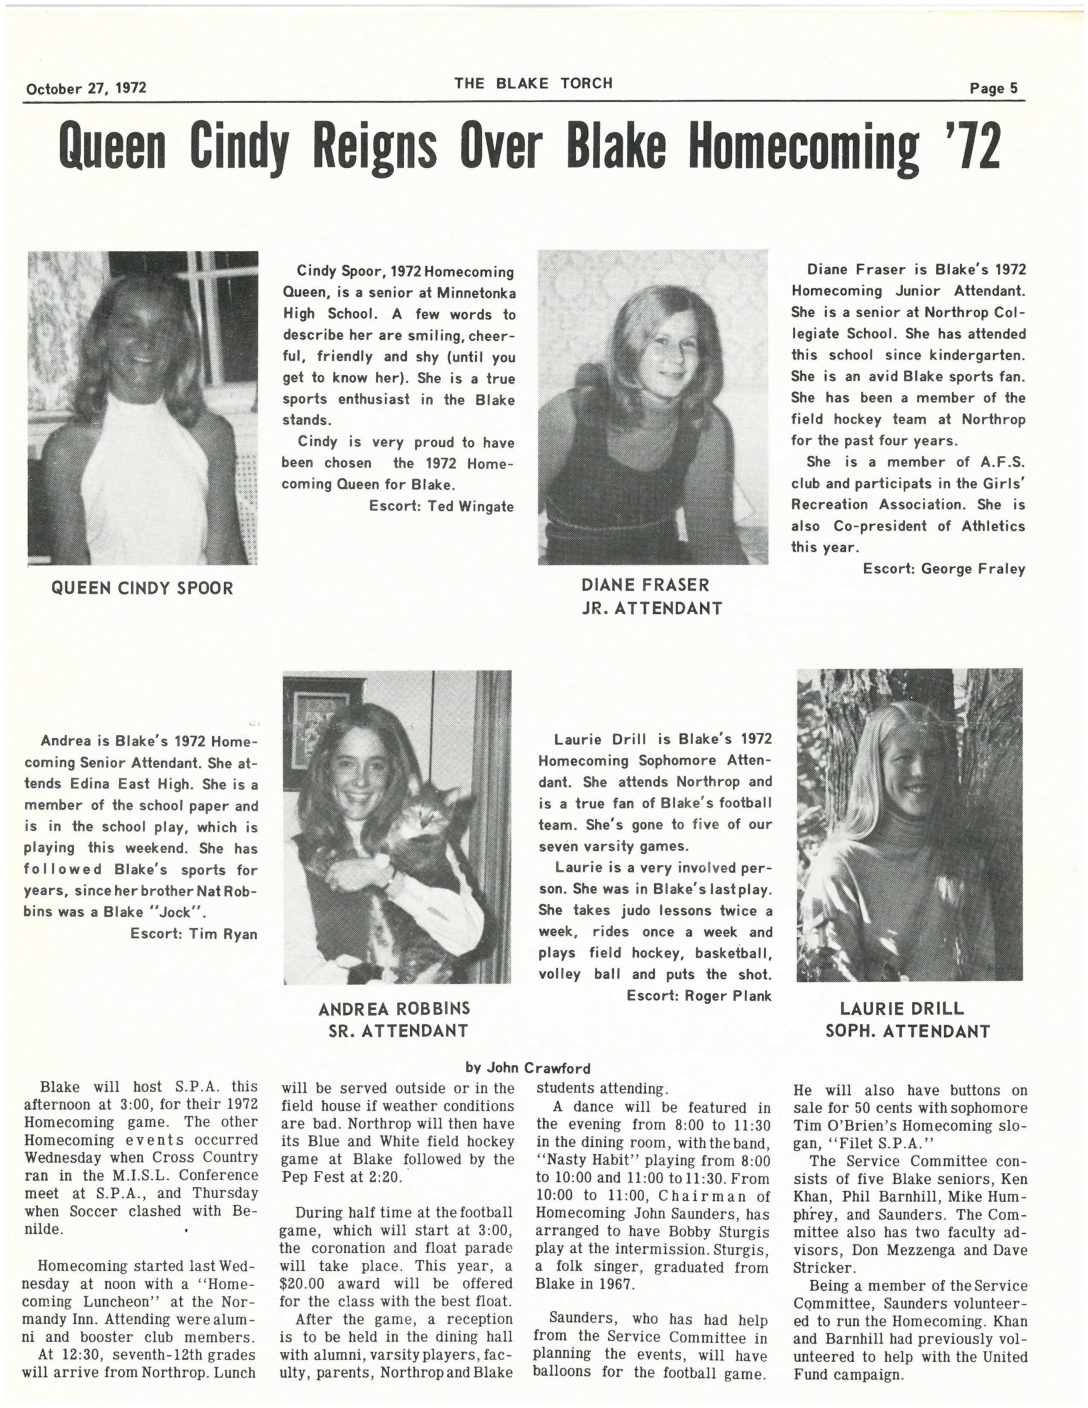 A page of “The Torch” issue published in 1972 depicts an old tradition of homecoming, revealing their Homecoming queen, the three attendants and their escorts from Blake with a small blurb next to their picture.